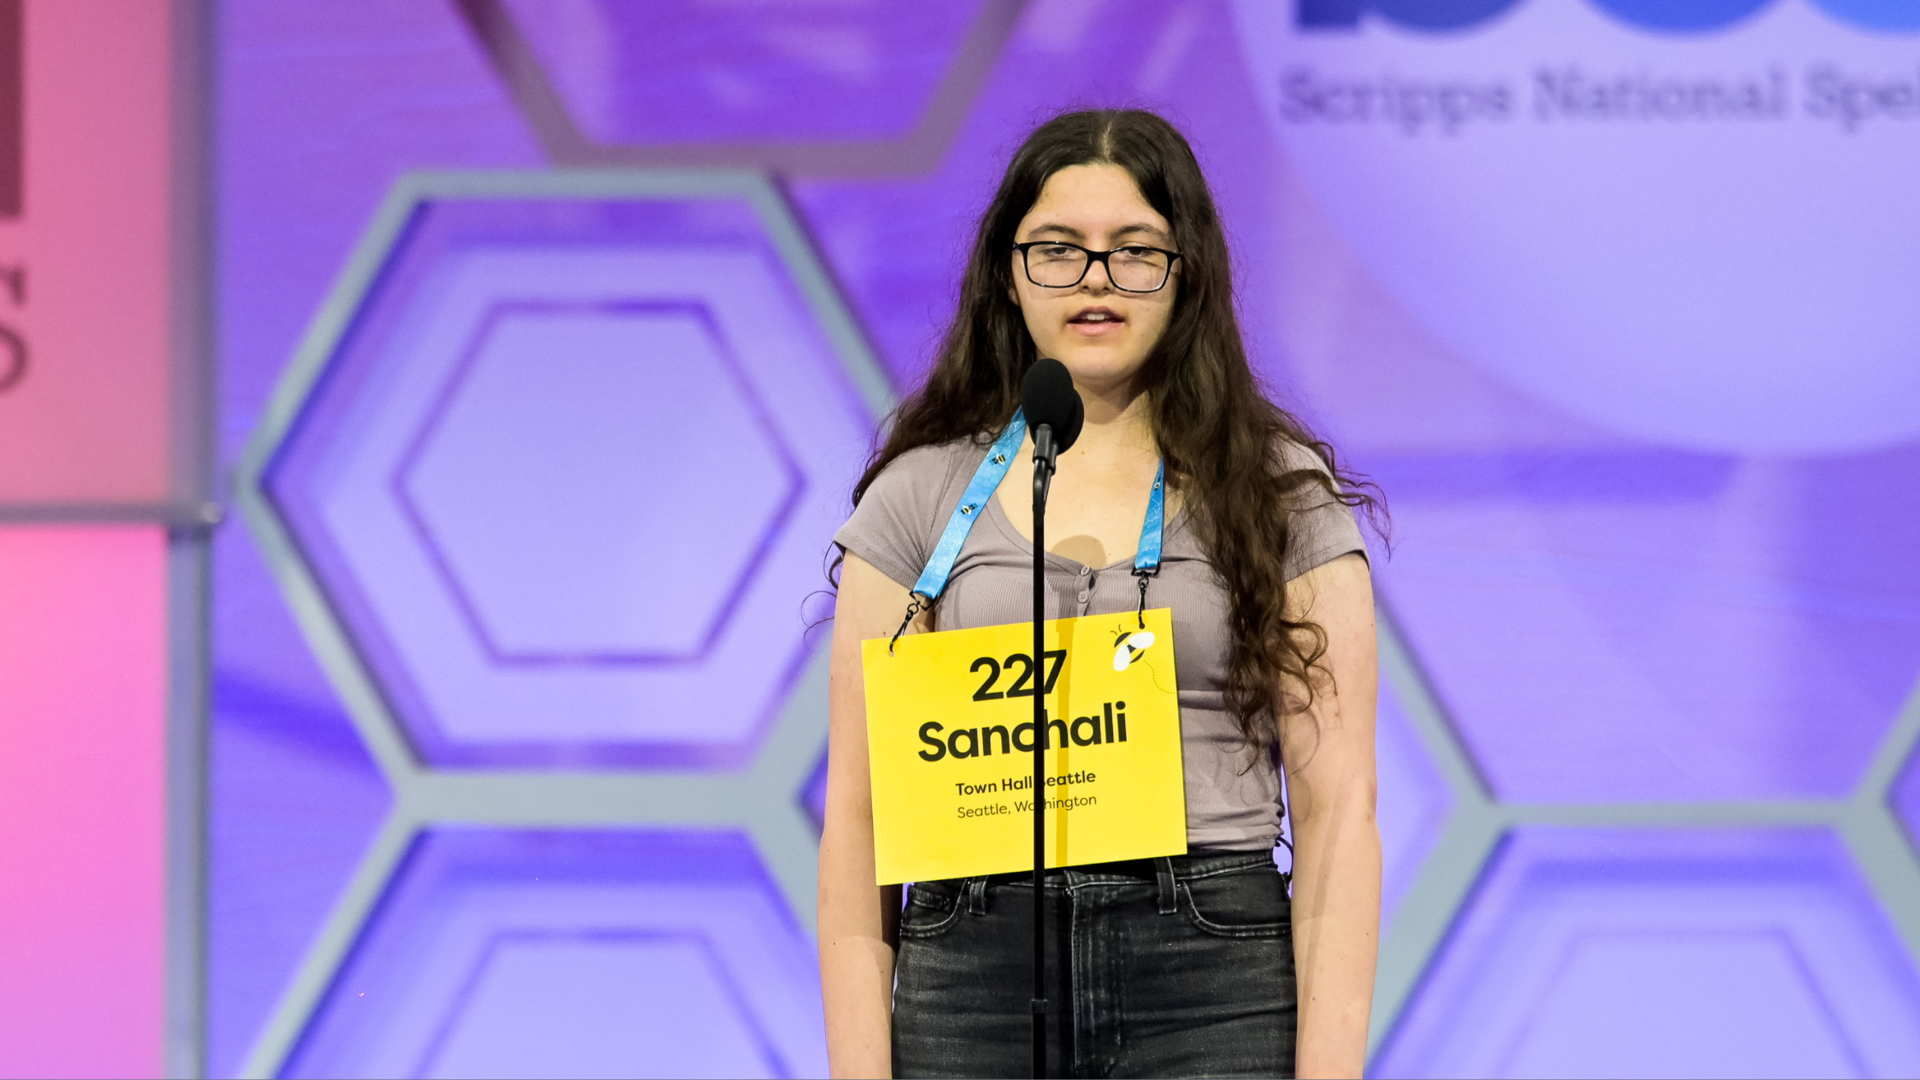 A young person with a yellow cardboard sign on their chest competes in a spelling bee